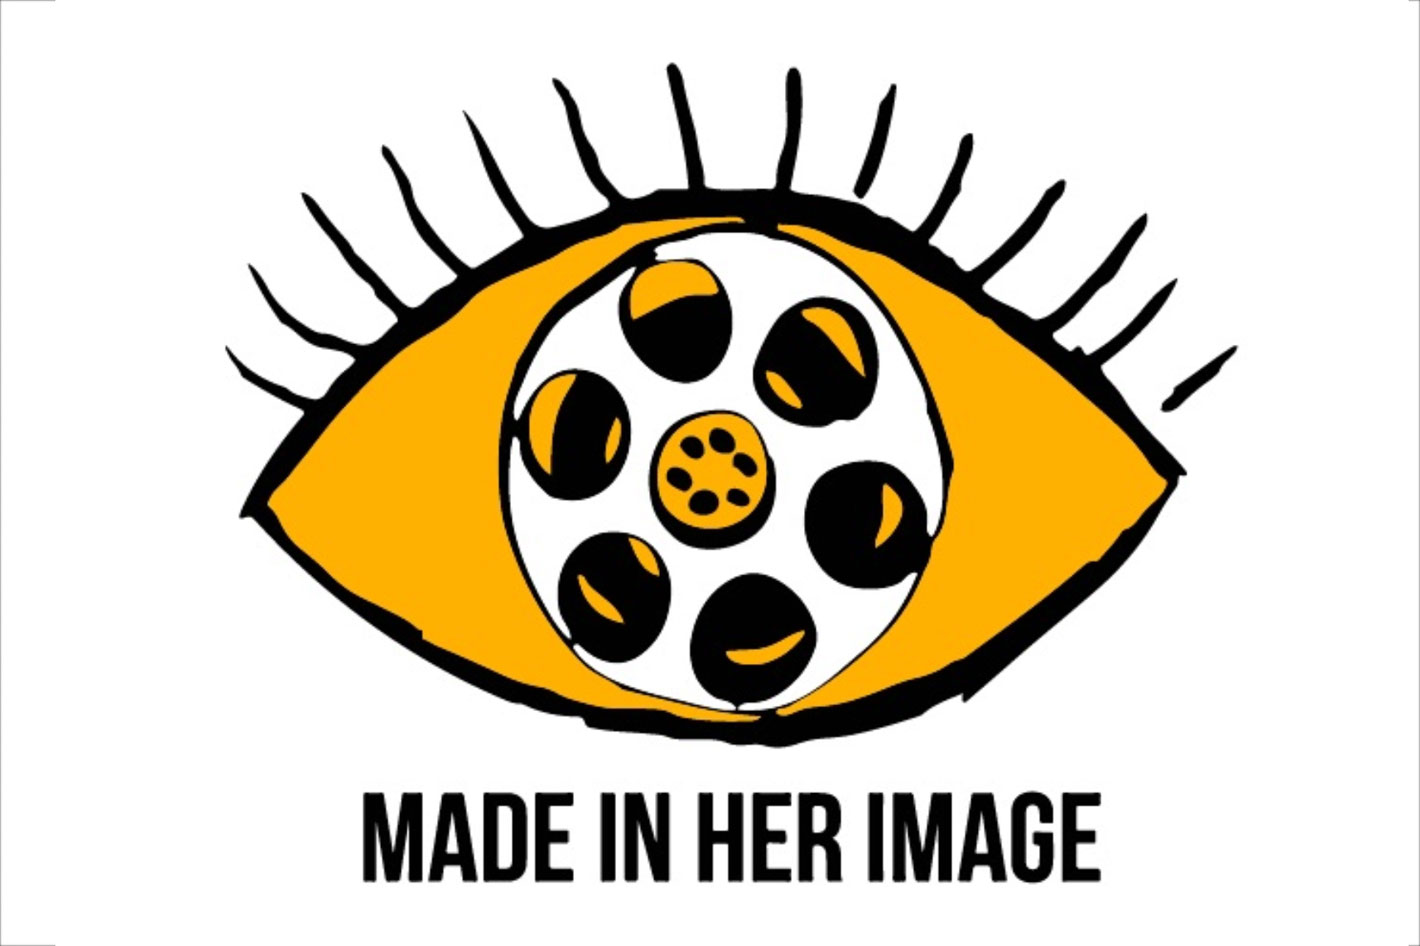 Made In Her Image has a FREE cinematography workshop